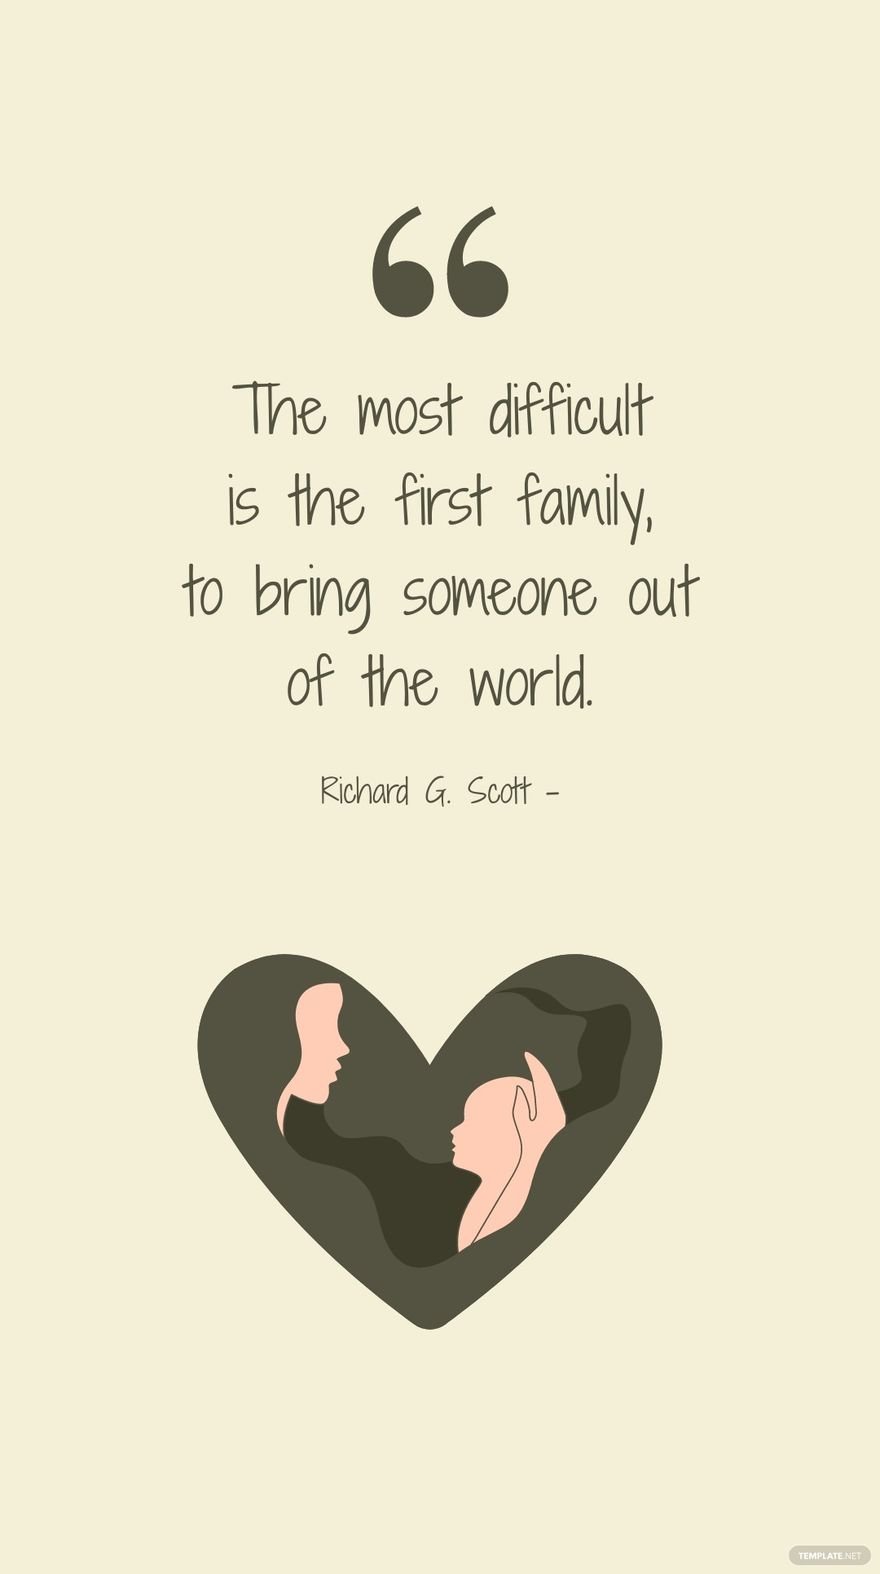 Free Richard G. Scott - The most difficult is the first family, to bring someone out of the world. in JPG